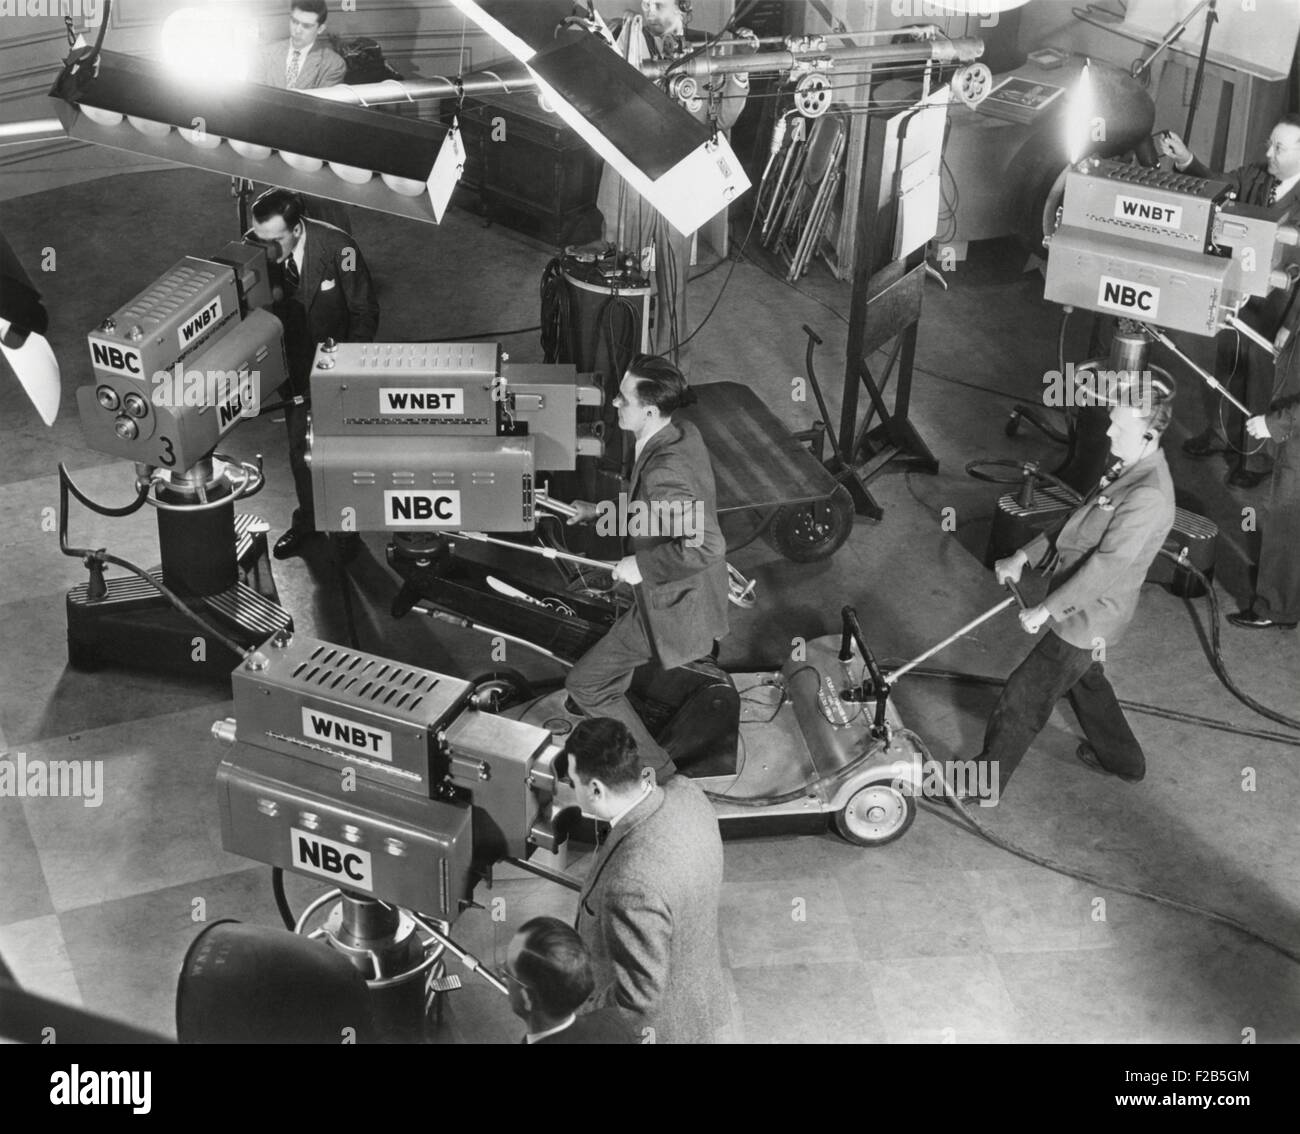 Cameras are tested on the television studio set before the program goes on the air. - (BSLOC 2014 17 139) Stock Photo